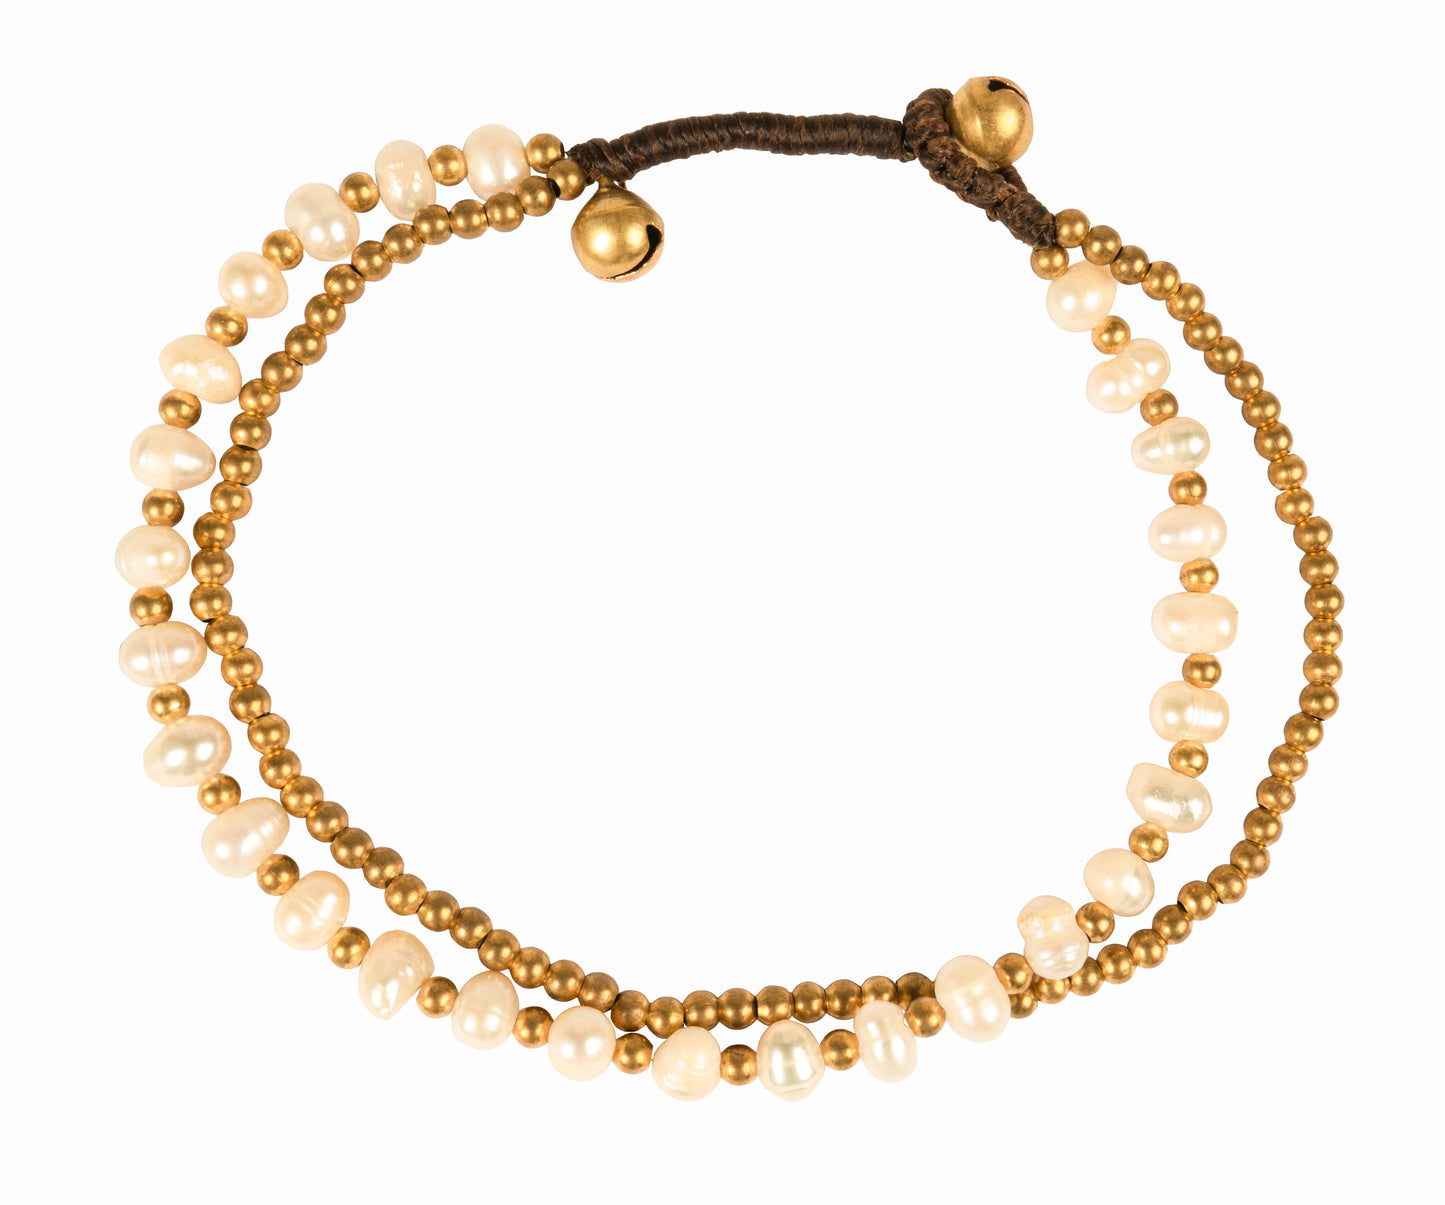 CCcollections Beaded Anklets for Women - Brass Bell Wax Cord Ancle Bracelet - Natural Stone, Shell, Pearls - CCCollections